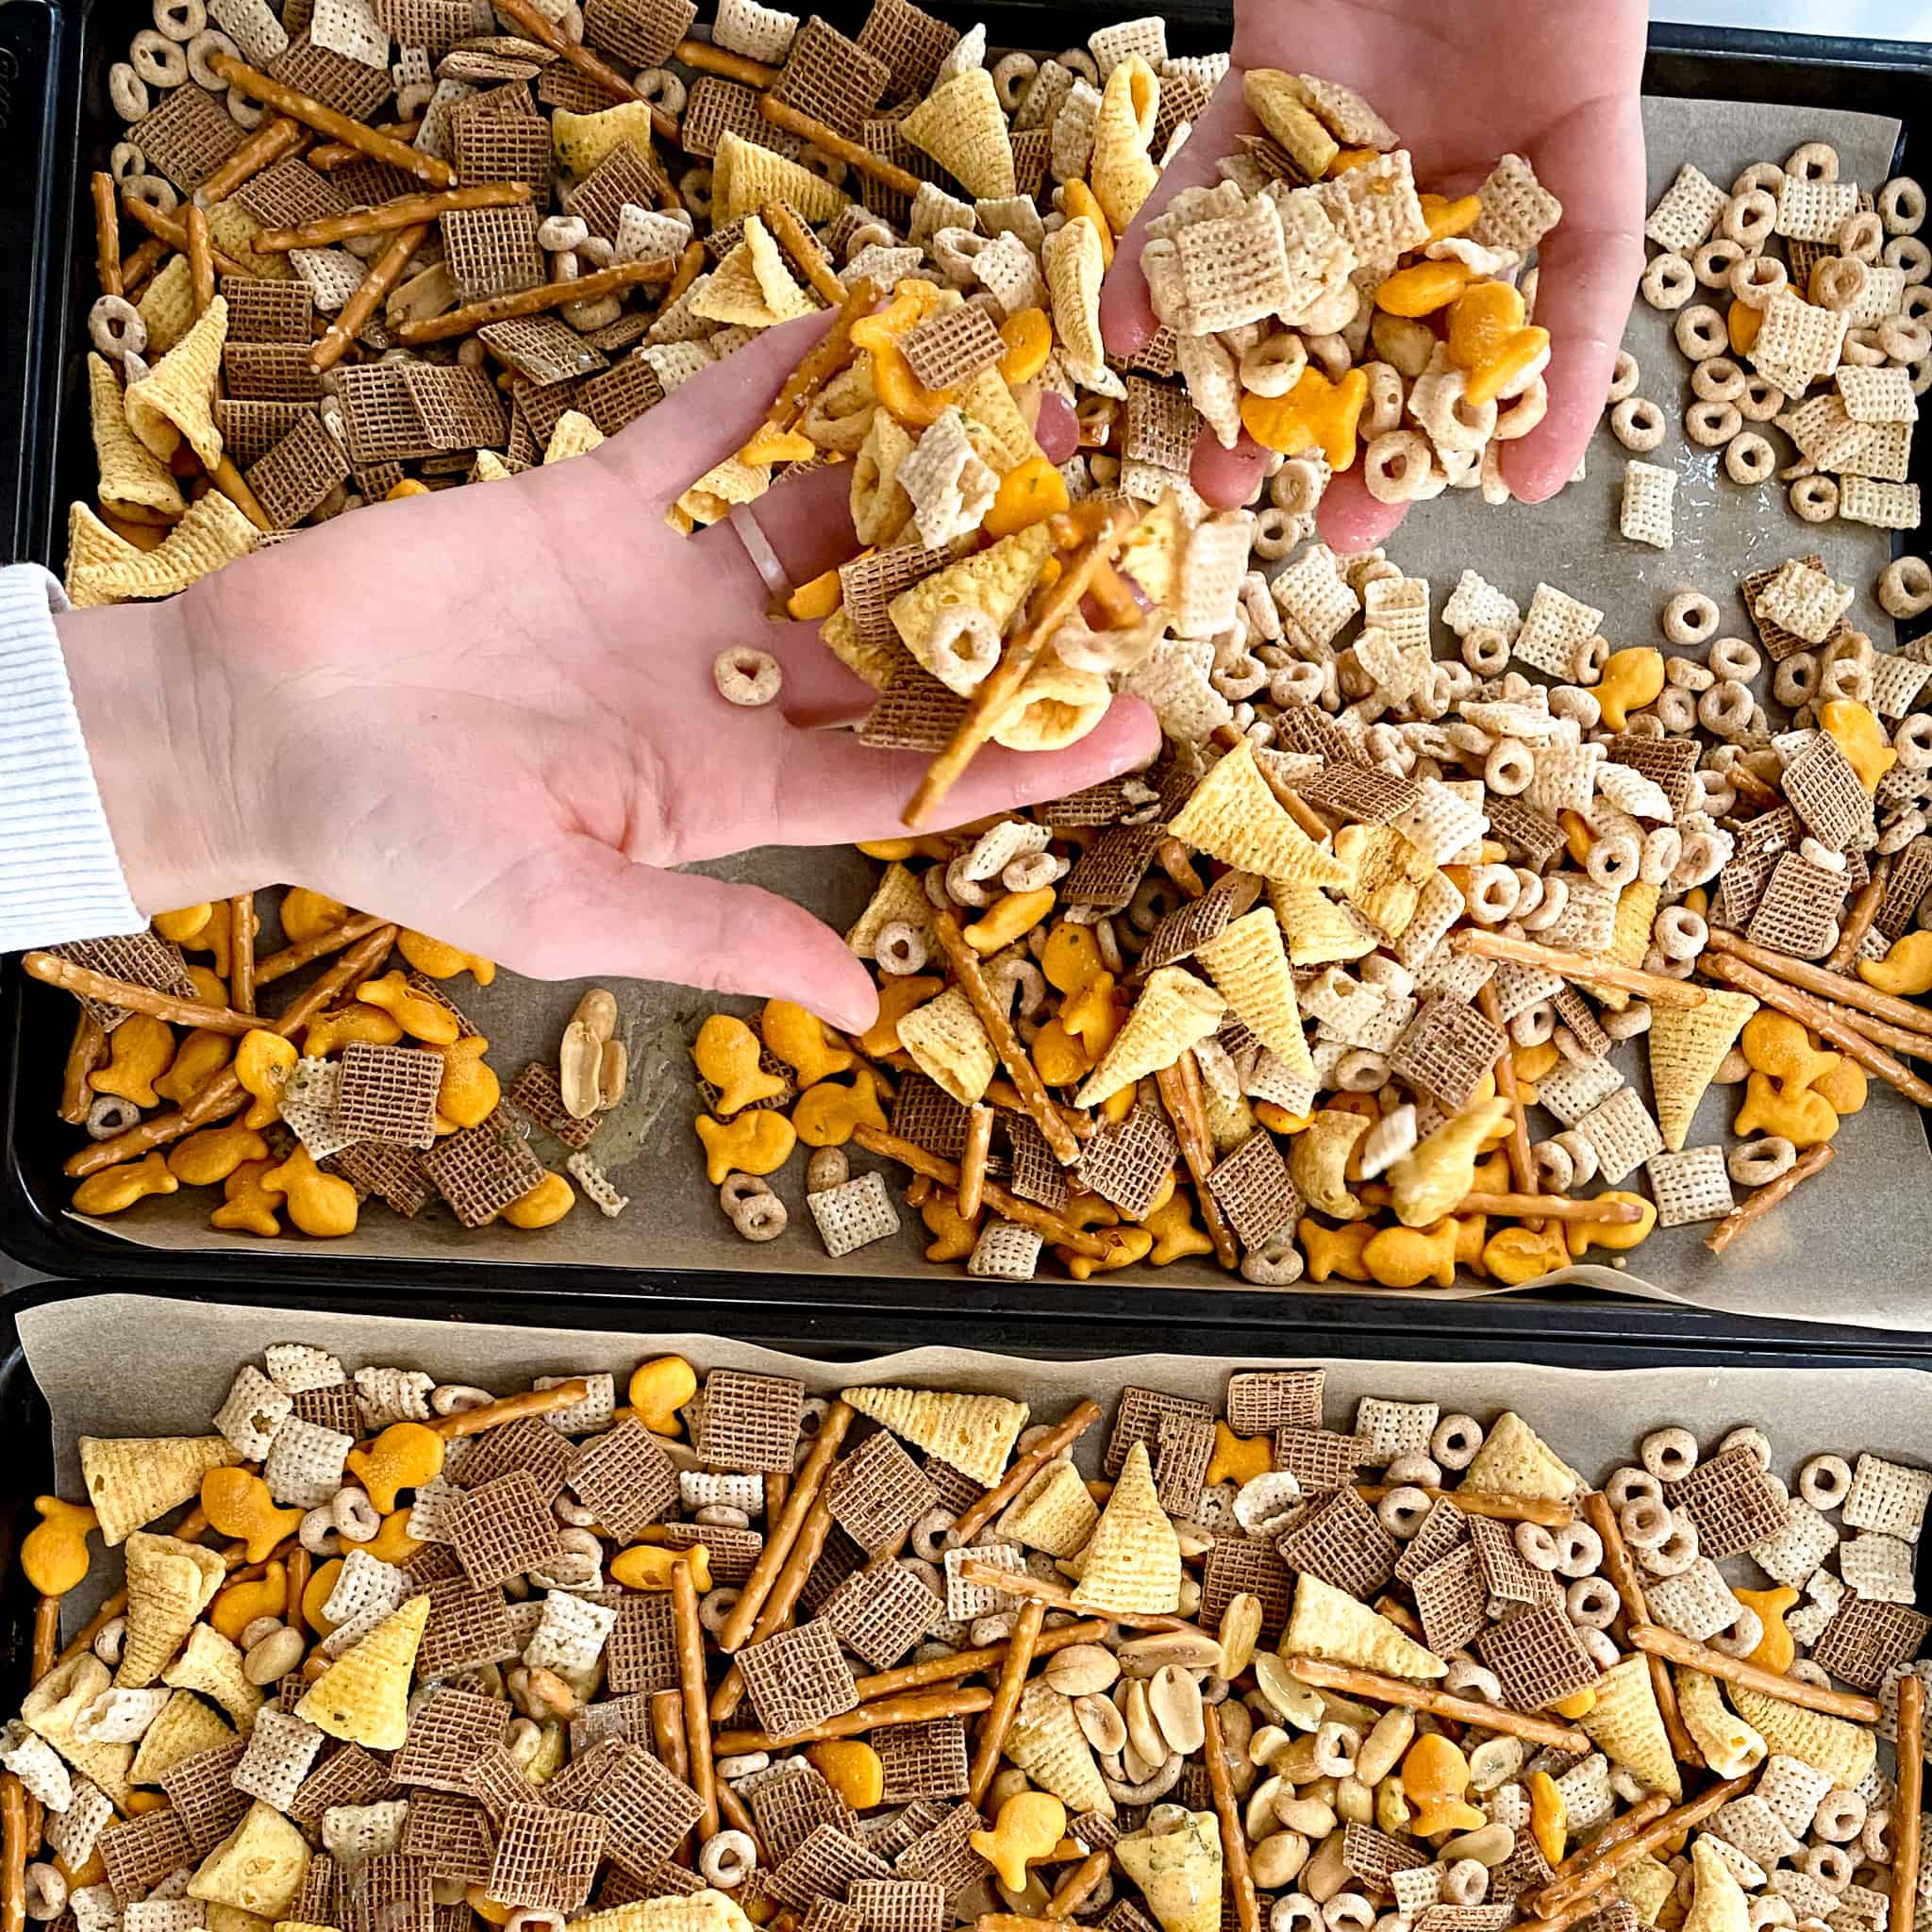 Mixing the Chex mix by hand.